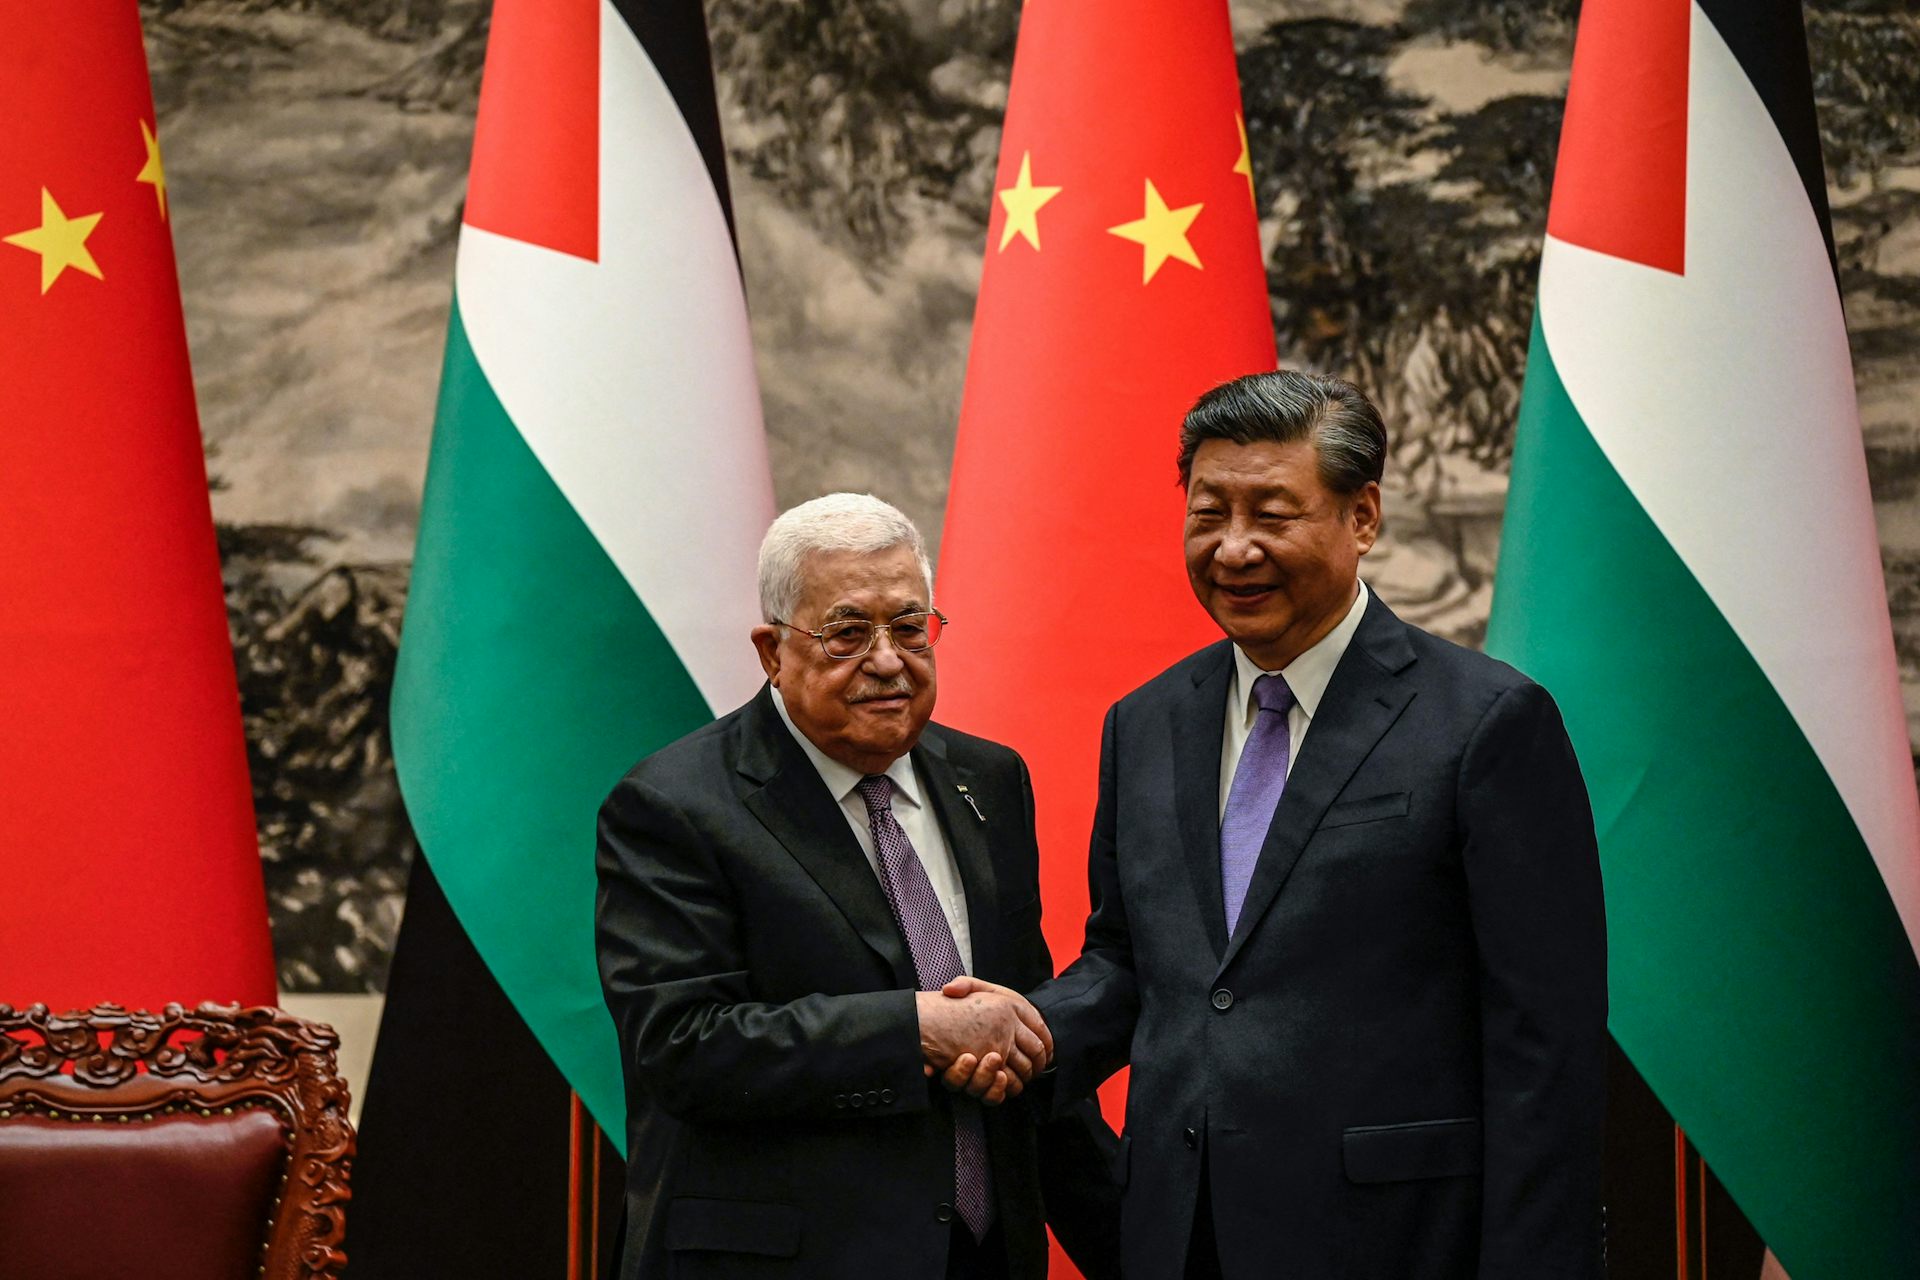 Israel-Hamas War Puts China’s Strategy of ‘Balanced Diplomacy’ in the Middle East at Risk